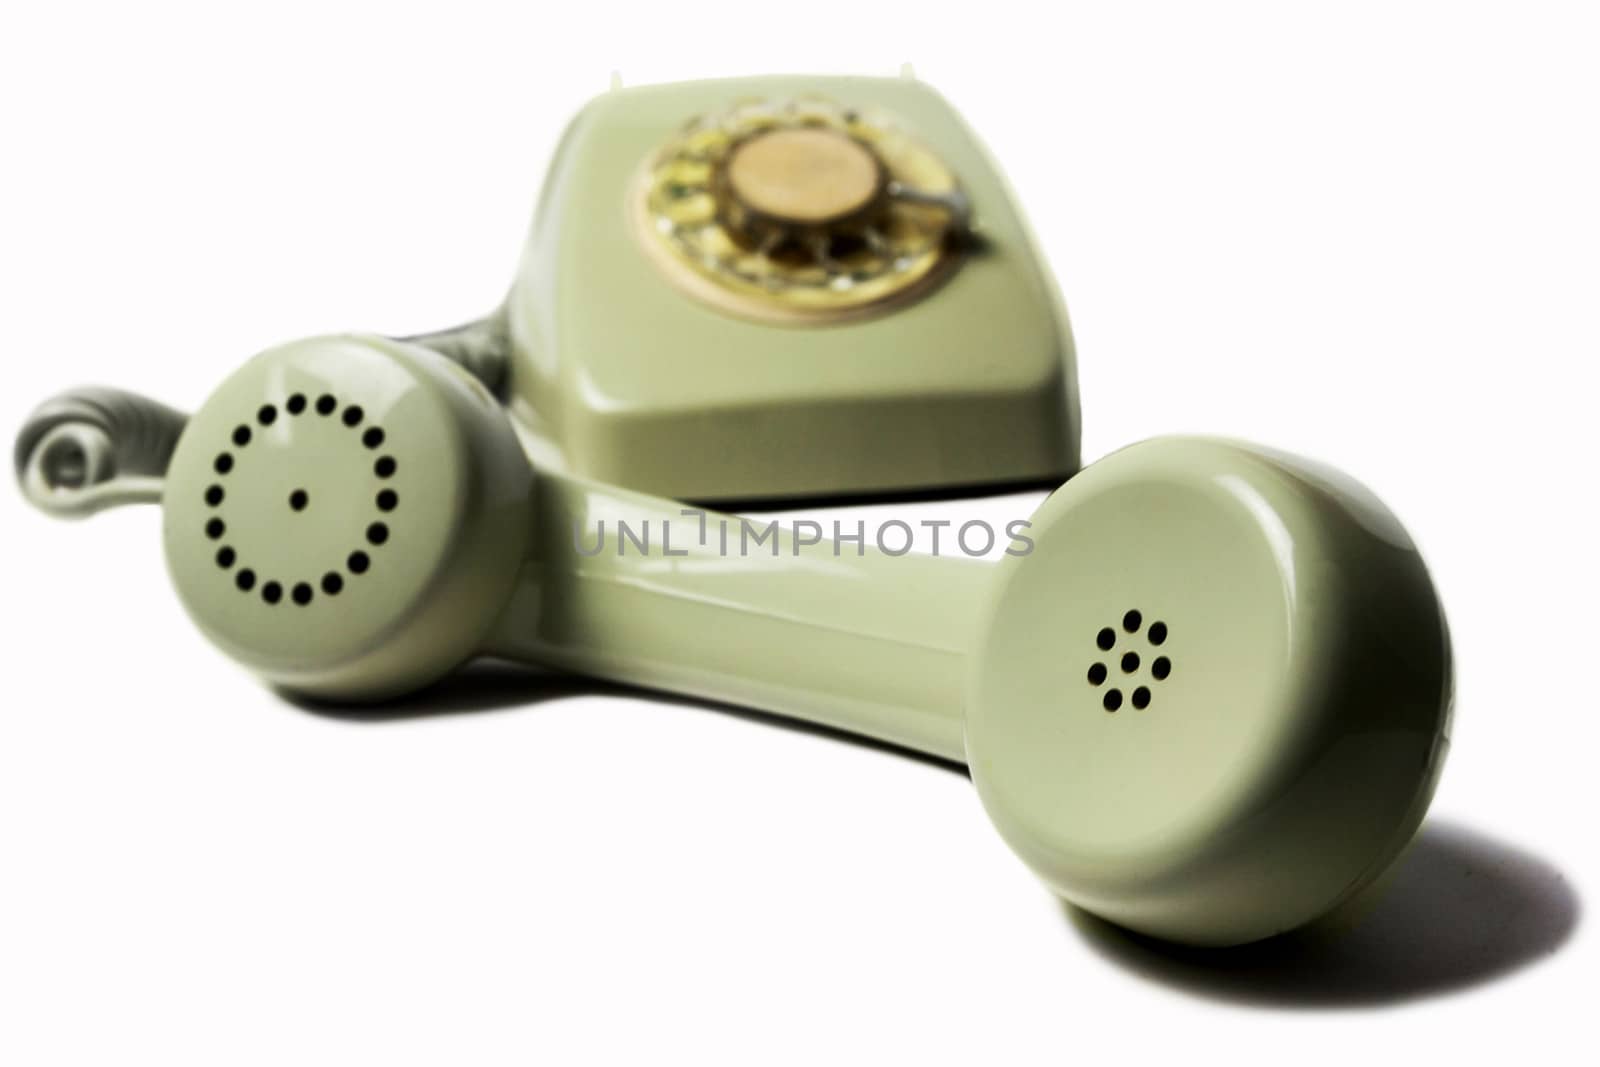 Vintage telephone receiver isolated on white background 